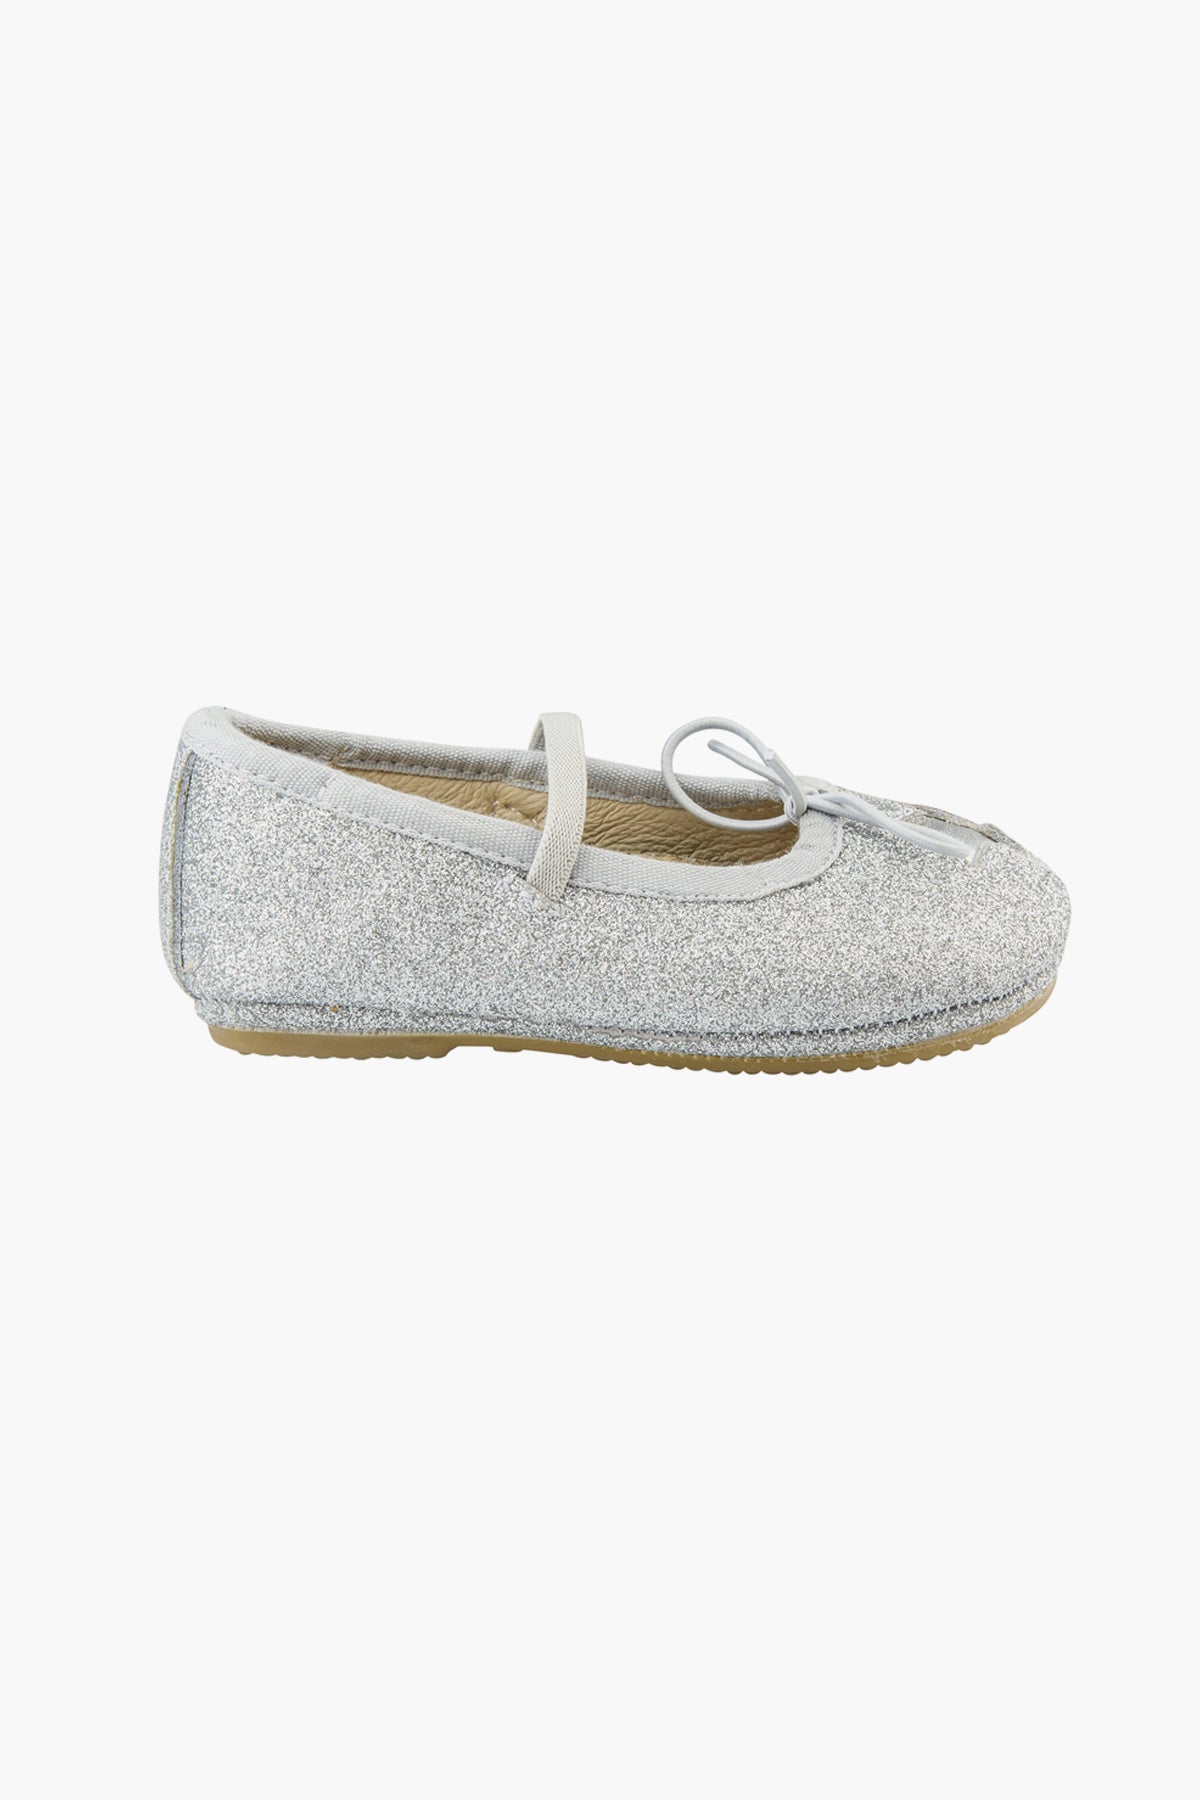 Old Soles Cruise Star Baby Girls Shoes - Silver – Mini Ruby